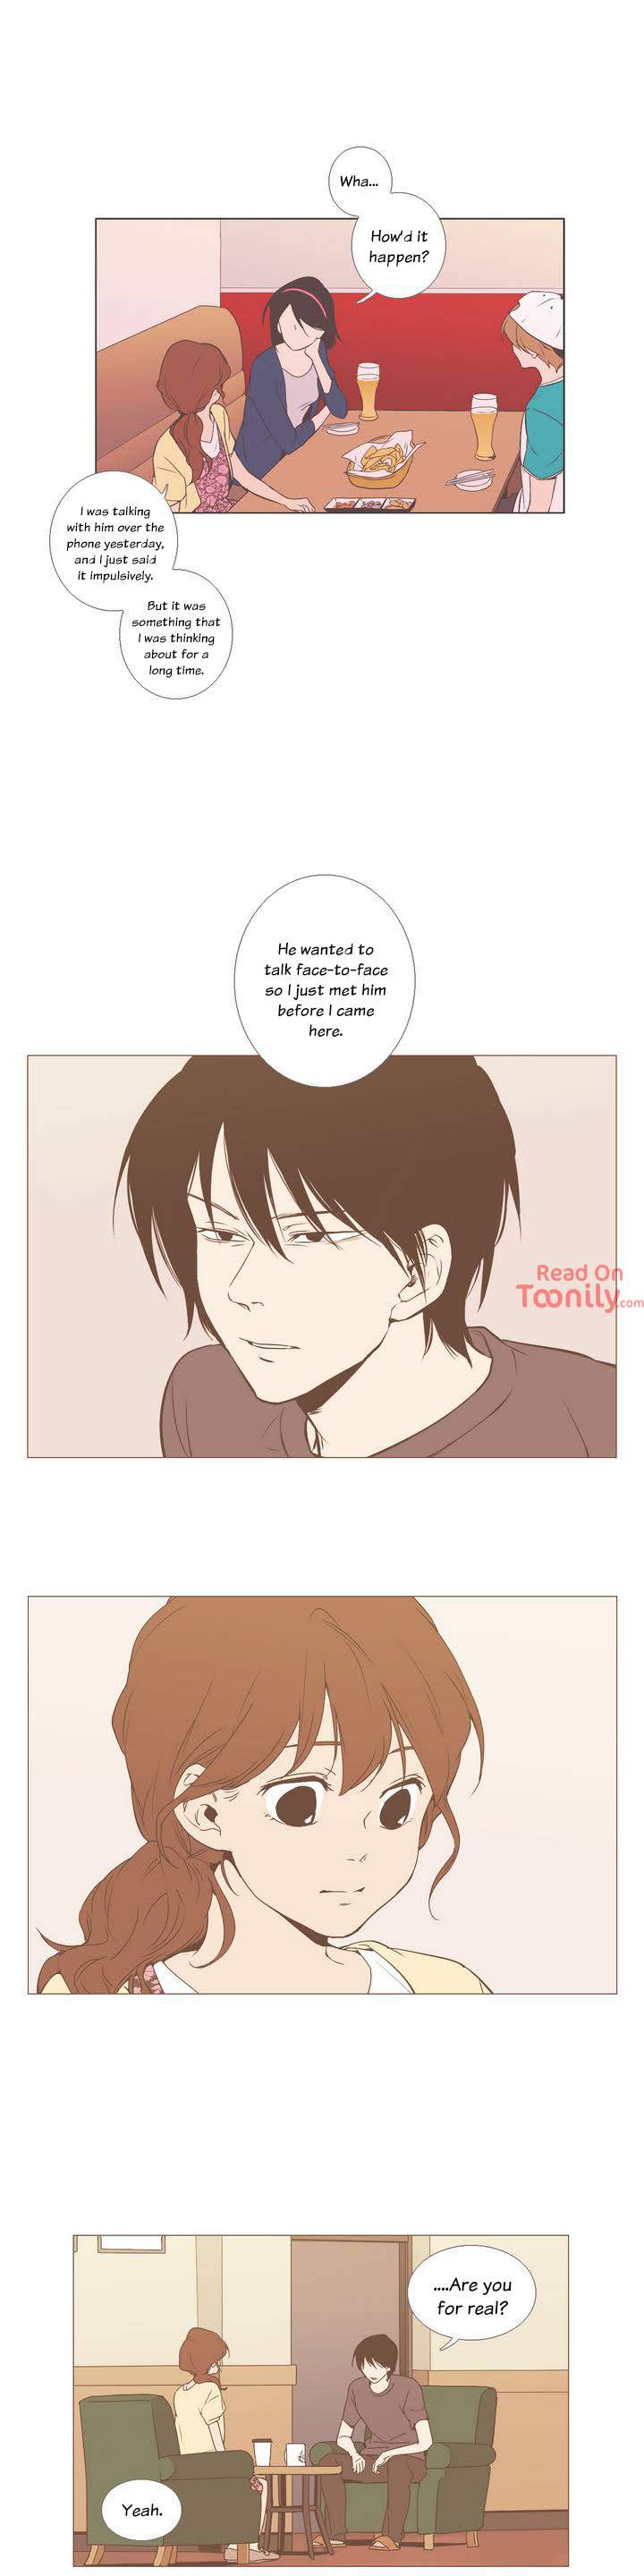 Something About Us - Chapter 22 Page 3